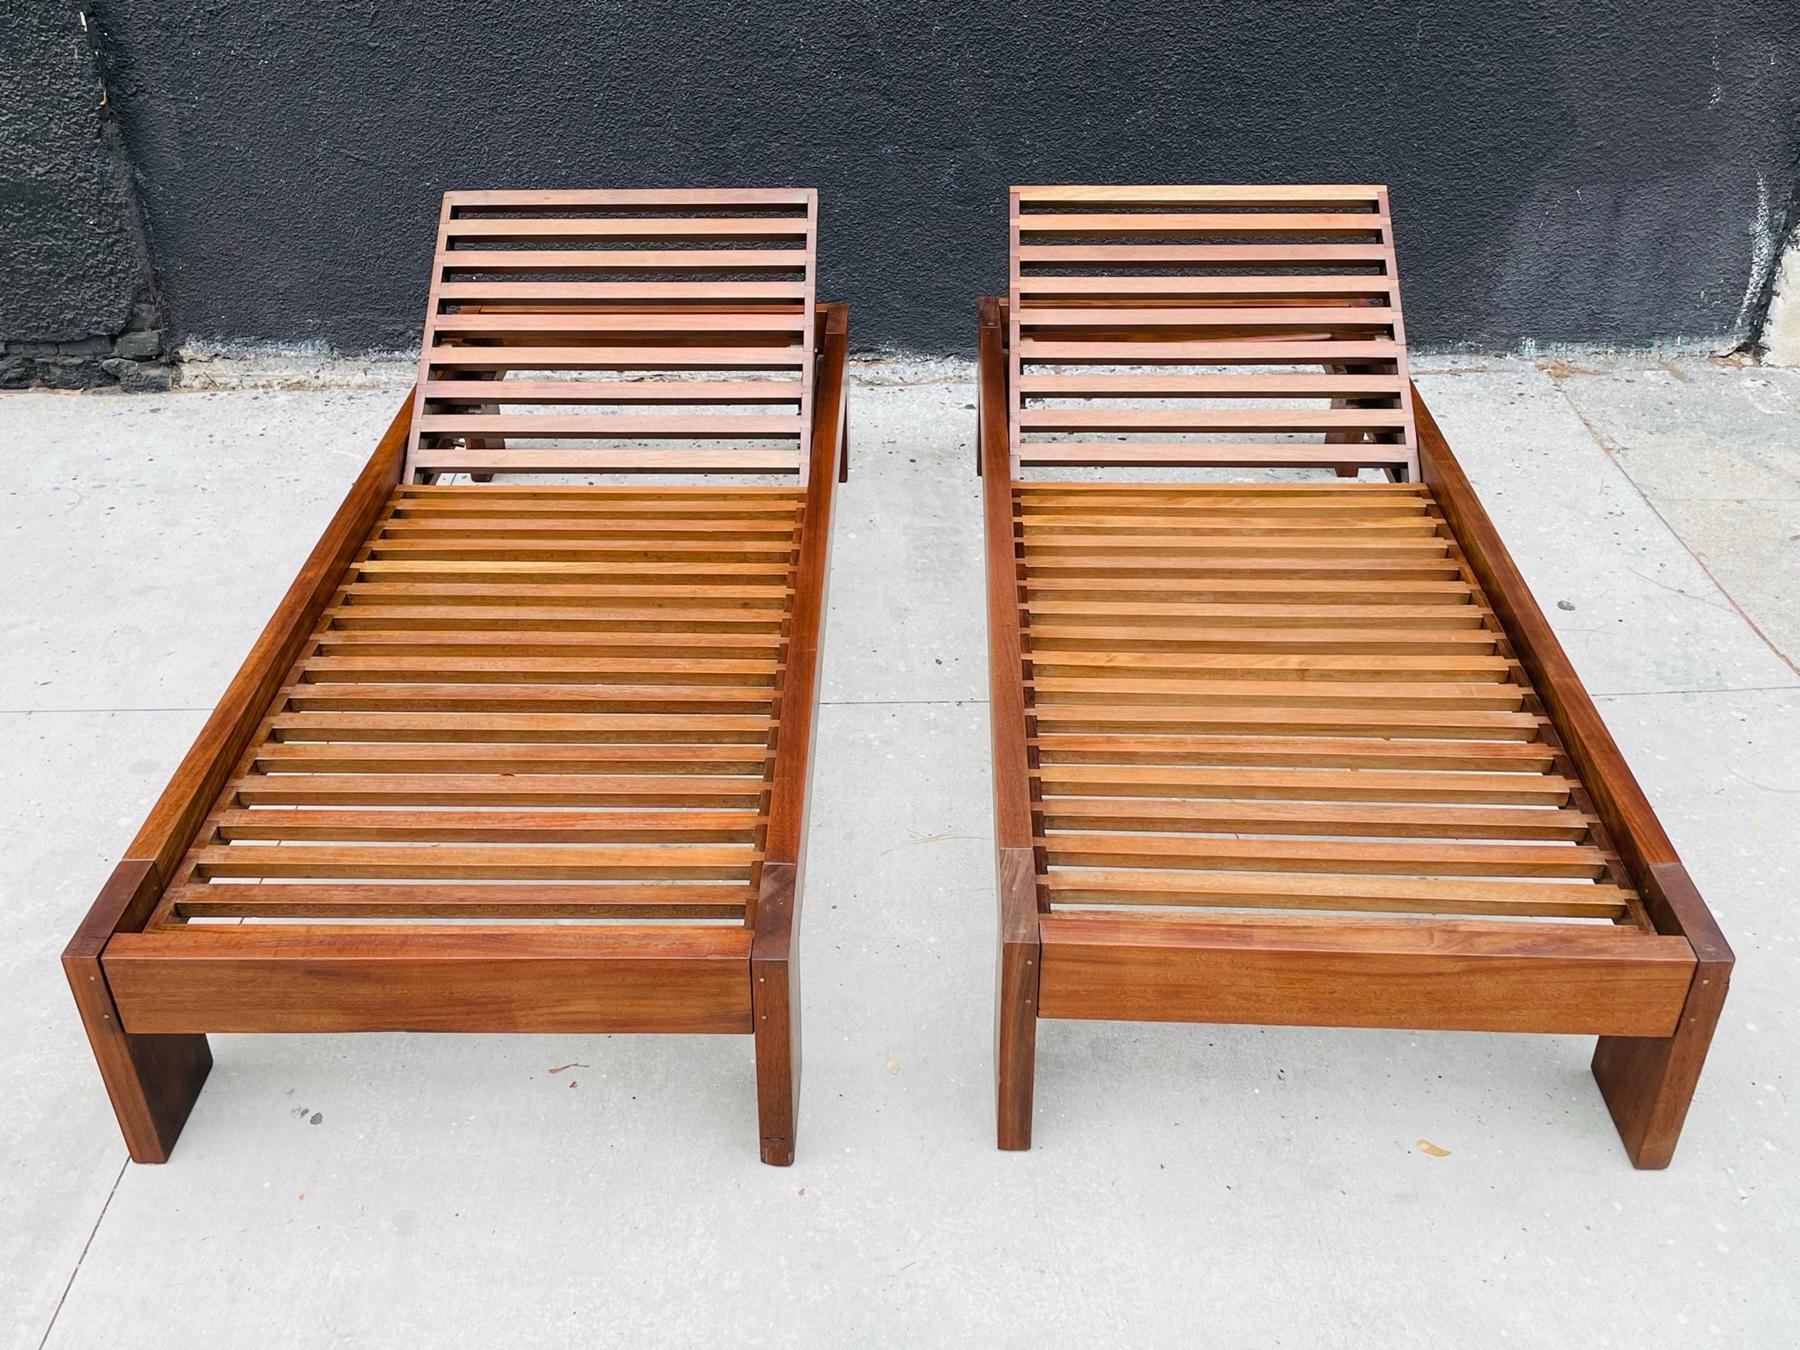 Introducing our Mid-Century Modern, Solid Teak Lounge Chairs from the 1970's. 

These vintage loungers were hand made in the USA in the early to mid 1970's, crafted from high-quality teak wood, providing a sturdy and durable foundation for